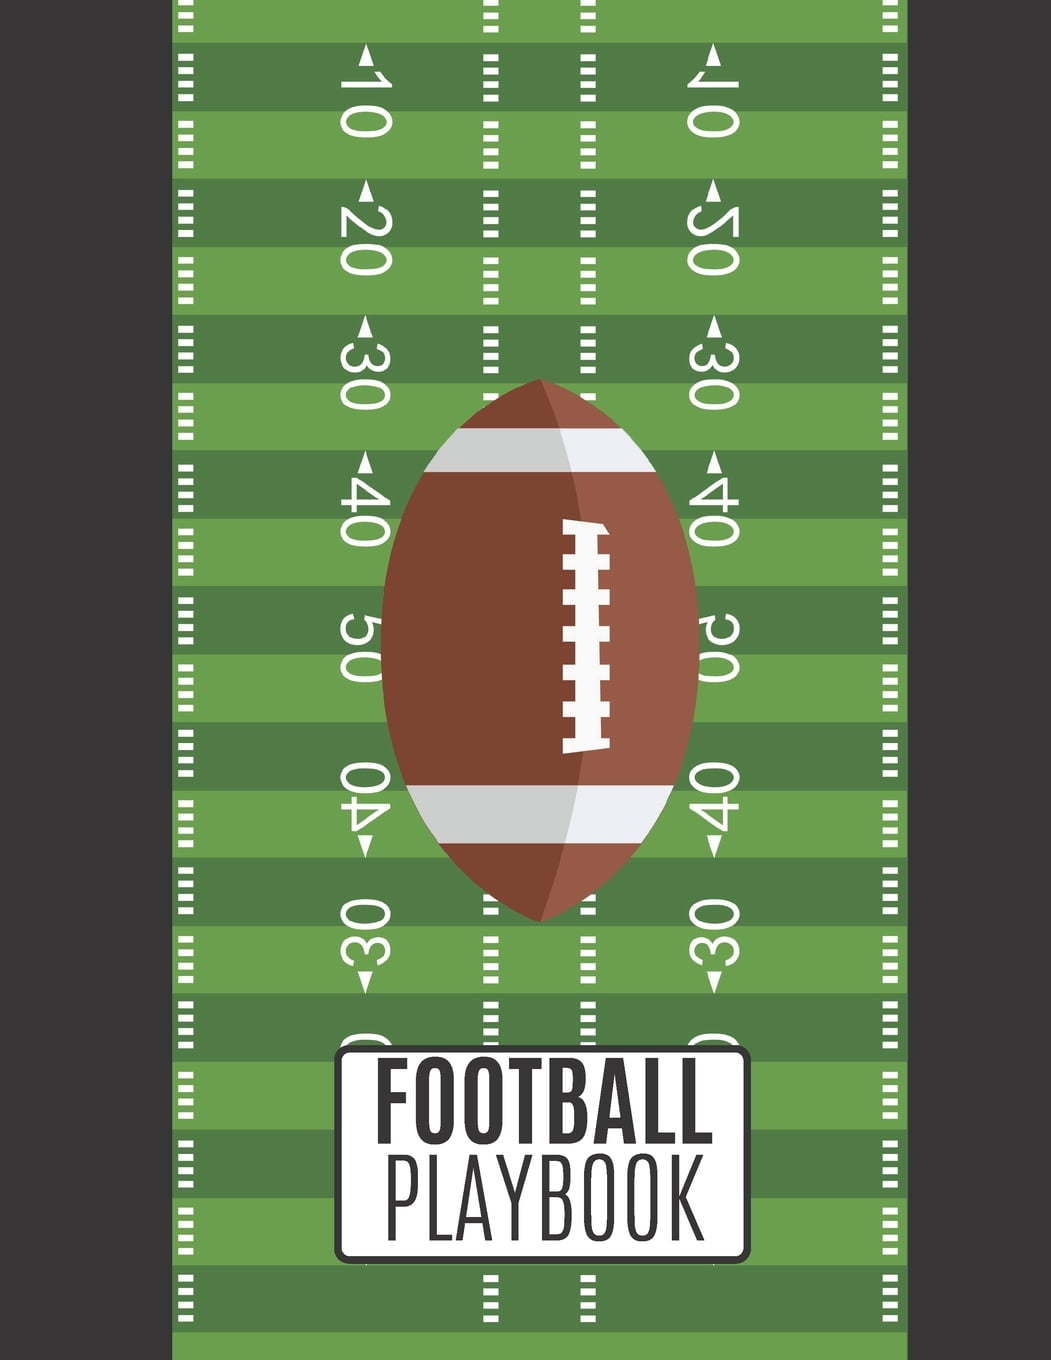 Football Playbook Football Playbook For Kids And Adults To Draw The